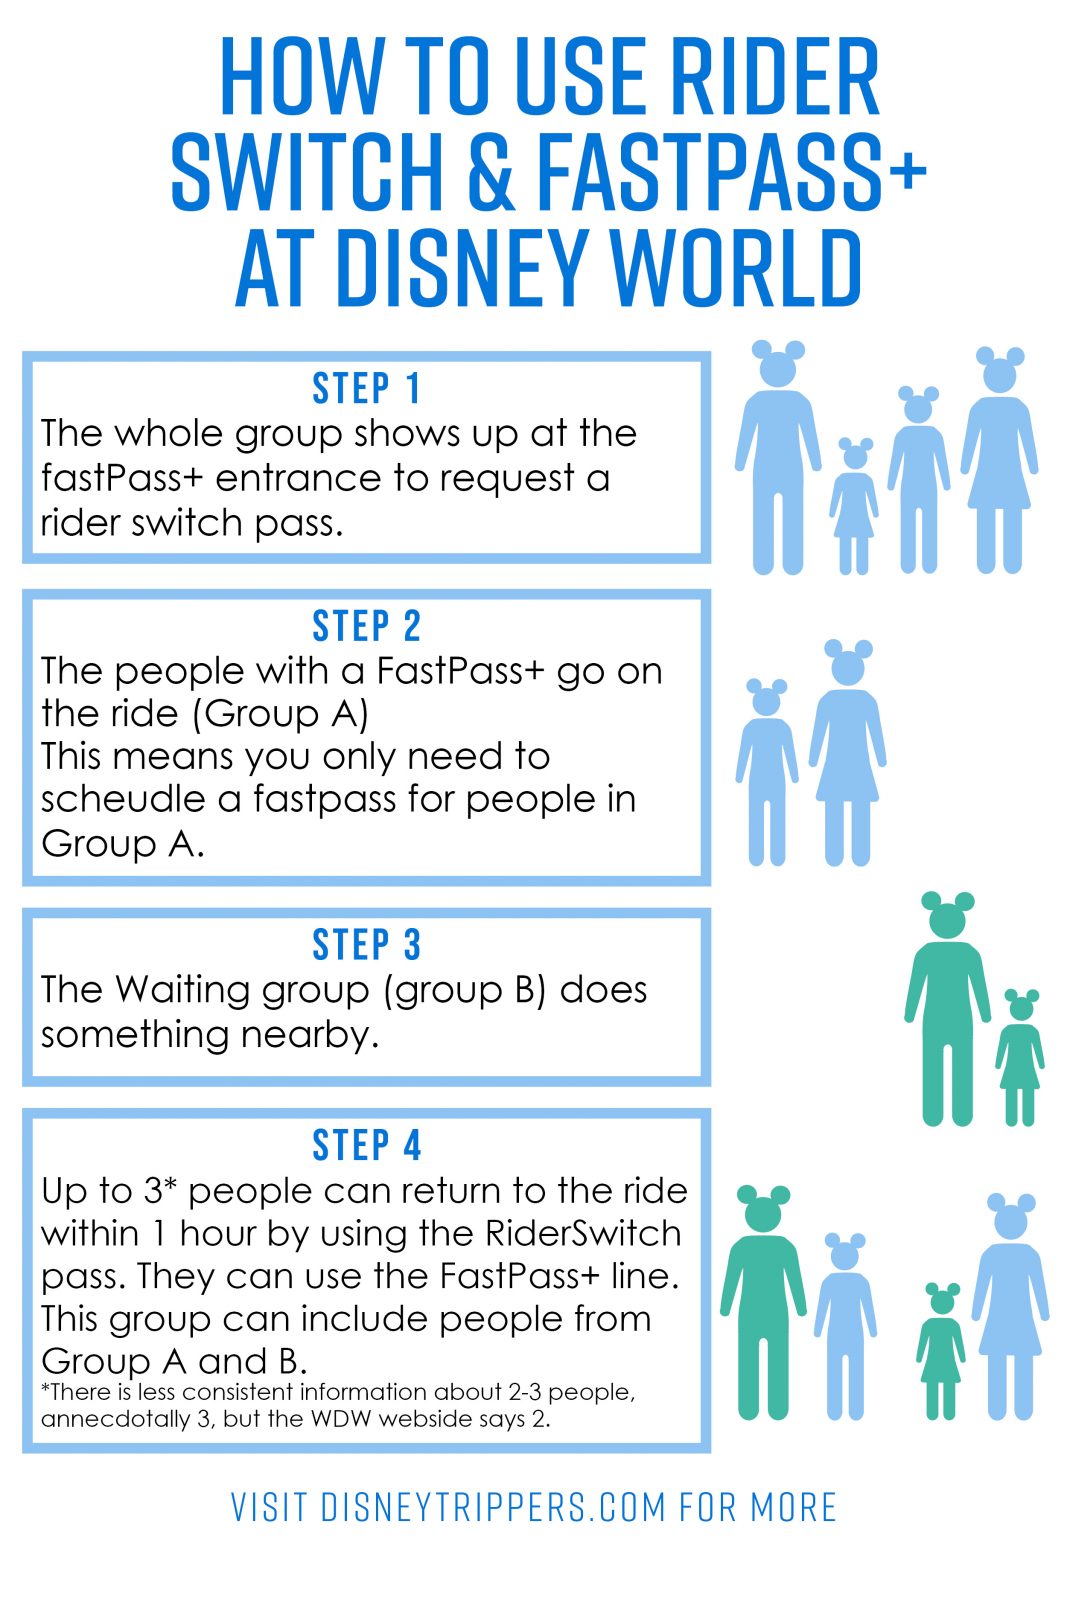 How To Use Rider Switch With Fastpass At Disney World | How to skip the lines with Disney rider switch | Tips for using Child swap at Disney | Disney rider swap tips | exactly how to use rider switch at Disney world | best rides at Disney | free disney printable graphic | tips for planning a trip to Disney | Disney family travel tips | disney tips for families #disney #fastpass